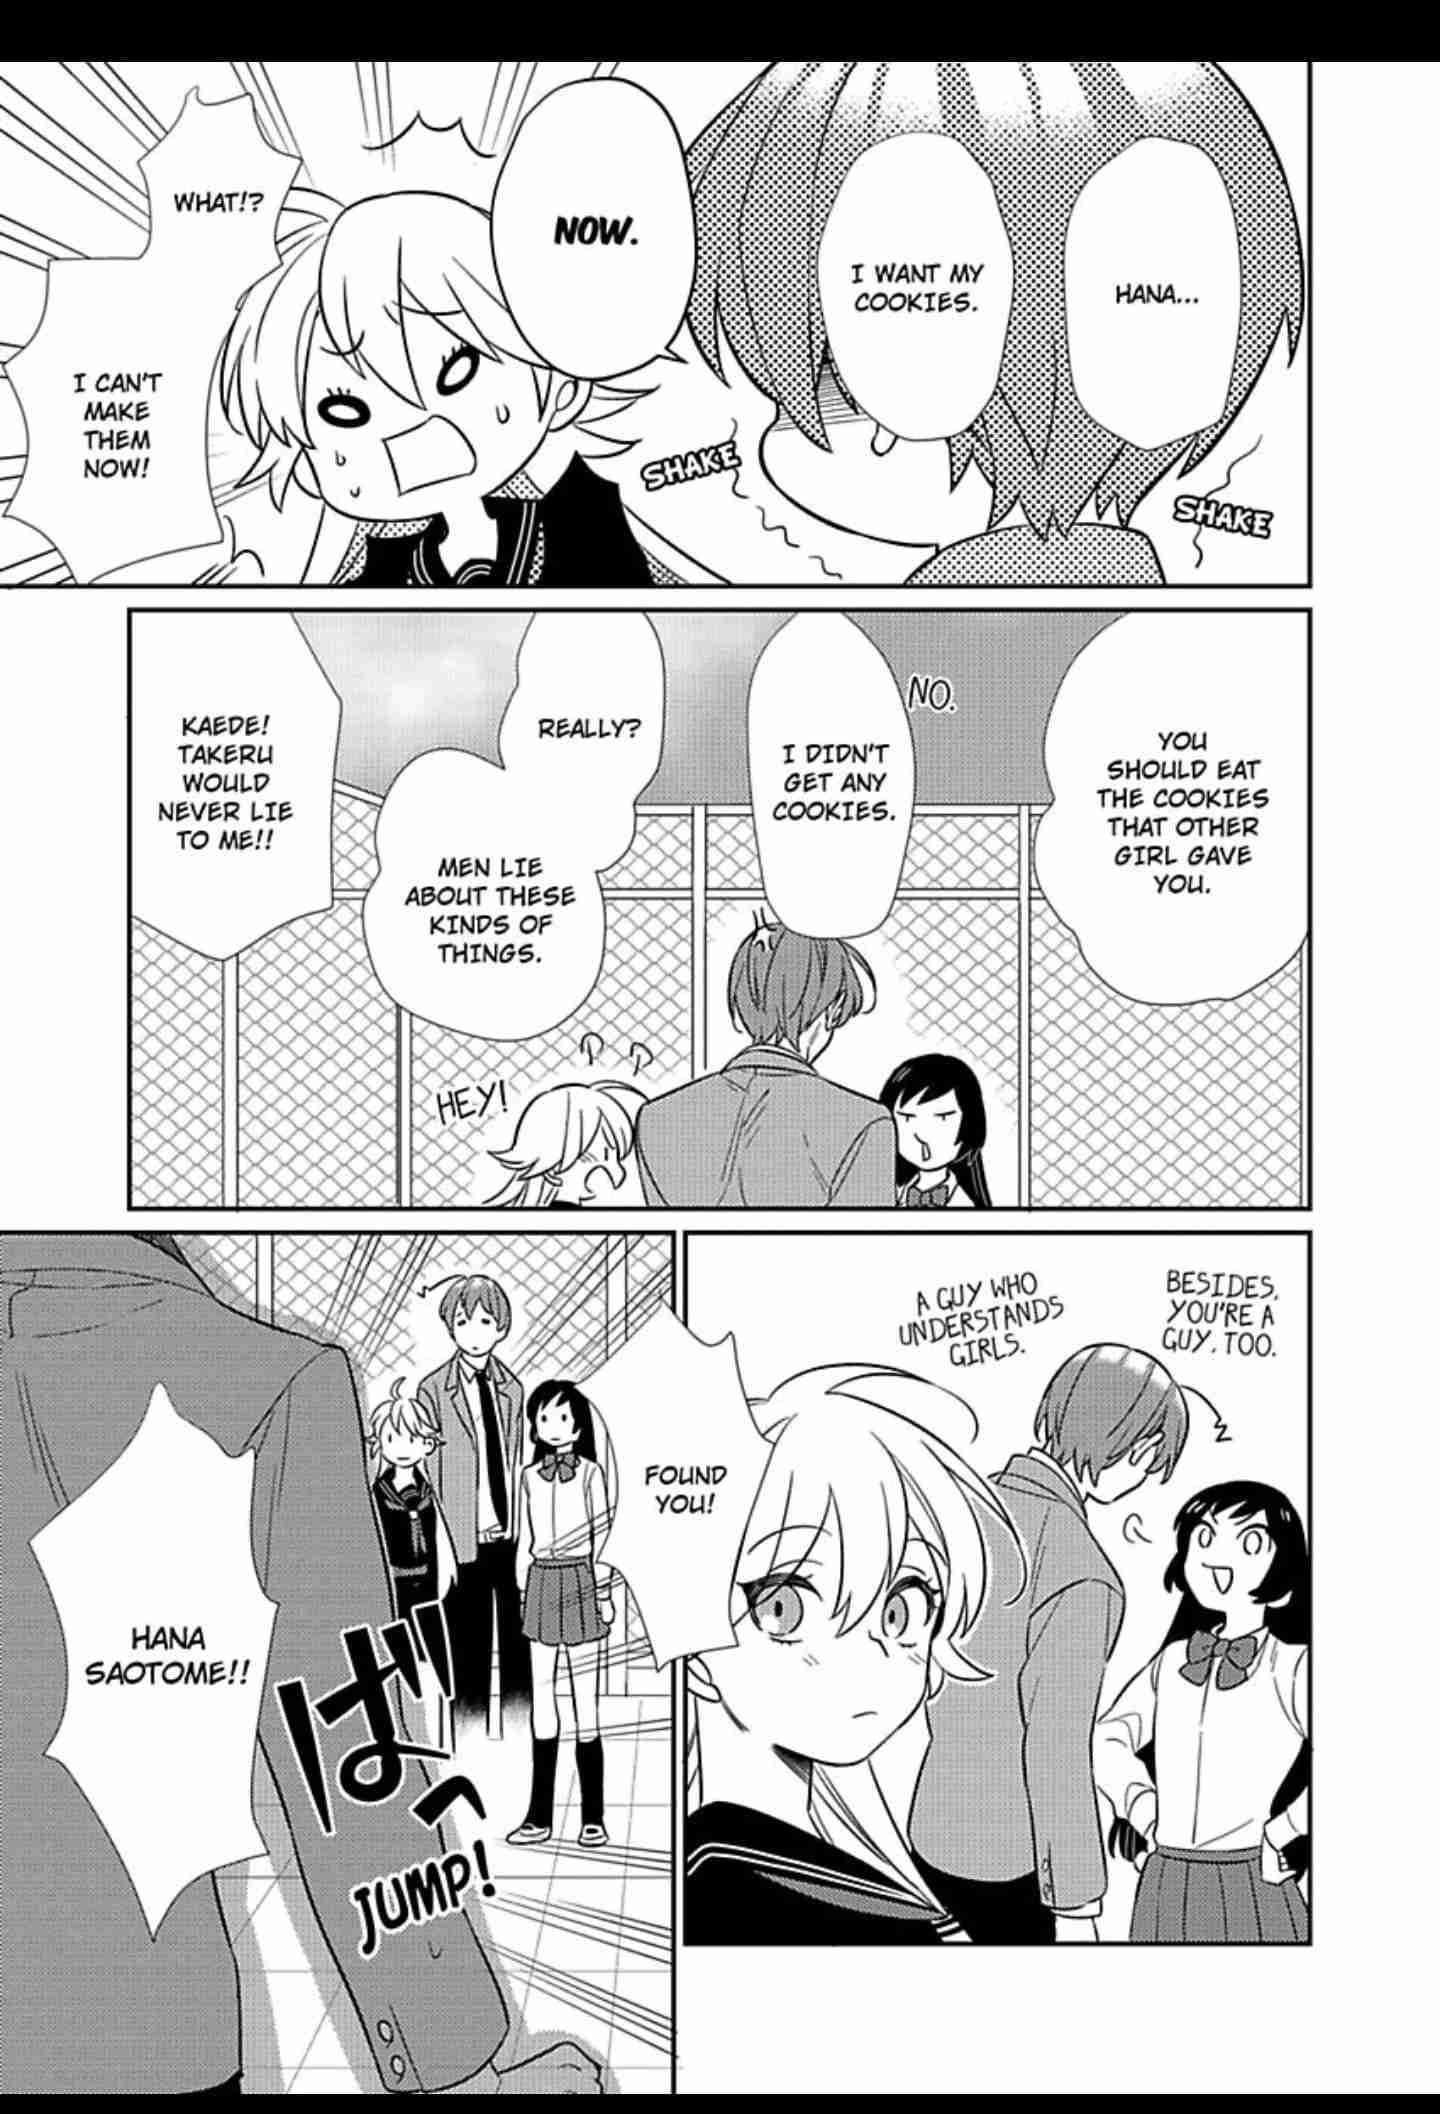 That Unexpected Side to my Childhood Friend -Watch Out for the Animal in Him! Vol.1 Ch.4